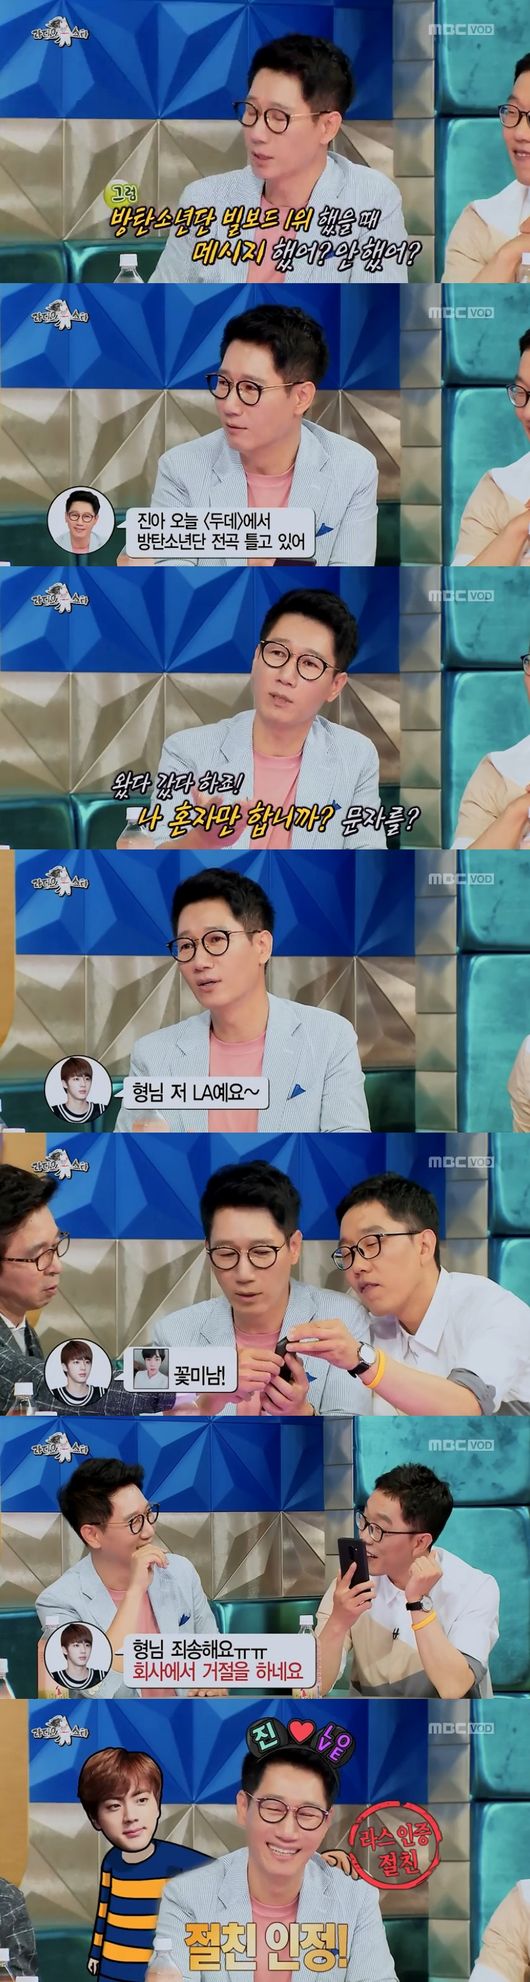 Disclosure is a great welcome, not because you distract and shave your opponent, but because you disclosure a warm and warm story.Ji Suk-jin, who appeared on Radio Star, received viewers navels with Disclosure, which is different in dimension.On MBC Radio Star broadcast on the 20th, Ji Suk-jin was called as an entertainment transmission station with Gim Gu-ra.It is a lot of words, so we talk to each other frequently and share the current status of the entertainment industry.However, Gim Gu-ra said, Ji Suk-jin is cautious when only Yoo Jae-Suk talk comes out.At this, Ji Suk-jin said, I am confident that I know more about Yoo Jae-Suk than anyone else, but when it is delivered to Gim Gu-ra, it is erroneous.I think that the beginning of the misinformation is me, so I want to see how upset Yoo Jae-Suk will be. At this time, Cha Tae-hyun asked, Yoo Jae-suk is a chartered person.Unlike Gim Gu-ra, who does not know, Ji Suk-jin replied, Yoo Jae-Suk is a person.For the first time on the air, Yoo Jae-Suk was told that it was not a self but a charter, and MCs shouted out.Ji Seok-ji also revealed a text from BTS Jin. Jin came out to Running Man for a while and played games.I saw the eyes that I wanted to get close. When BTS was number one on the Billboard, I texted him, even playing the entire song from Date of the City to BTS-free bulletproof special. Jin also texted him on the show.She and I are brothers. I am texting you without warning. I send you a picture of LA. MCs suspected a friendship between Jean and Ji Suk-jin; eventually, Ji Suk-jin released a message from Jean, saying, Ill show you.MCs cut down Ji Suk-jin is squeaky, but Ji Suk-jin made the fans of Ami by revealing a personal friendship anecdote with Jean to the end.The Disclosure and BTS effects of Ji Suk-jin were synergistic.The moment Ji Suk-jin revealed the letter of gin, the ratings were 8.3% (Nilson metropolitan area), taking the best minute; thanks to the seductive and desirable episode Disclosure.Radio Star is the main point of the Disclosure game, which is a survival of guests to survive among bite MCs.Each person who appears has a lot of fun and fun with Disclosure for their surrounding entertainers or MCs.Sometimes excessive disclosure touched viewers, but this Ji Suk-jins Disclosure was warm and pleasant.The audience smiled comfortably.Radio Star